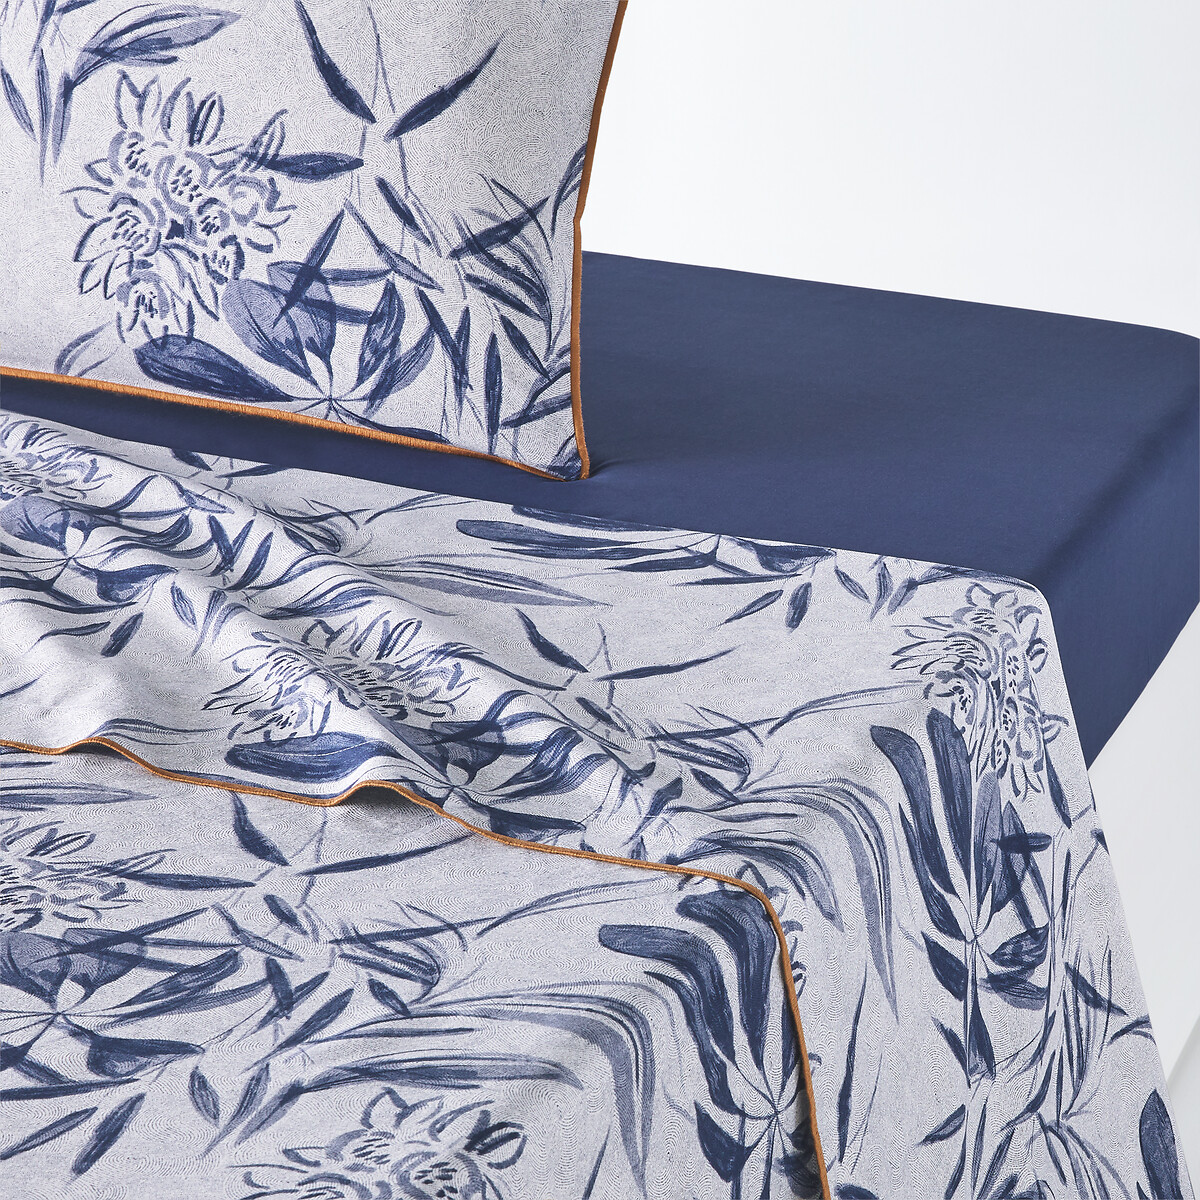 Mishima Tropical Floral 100% Cotton Percale 200 Thread Count Flat Sheet